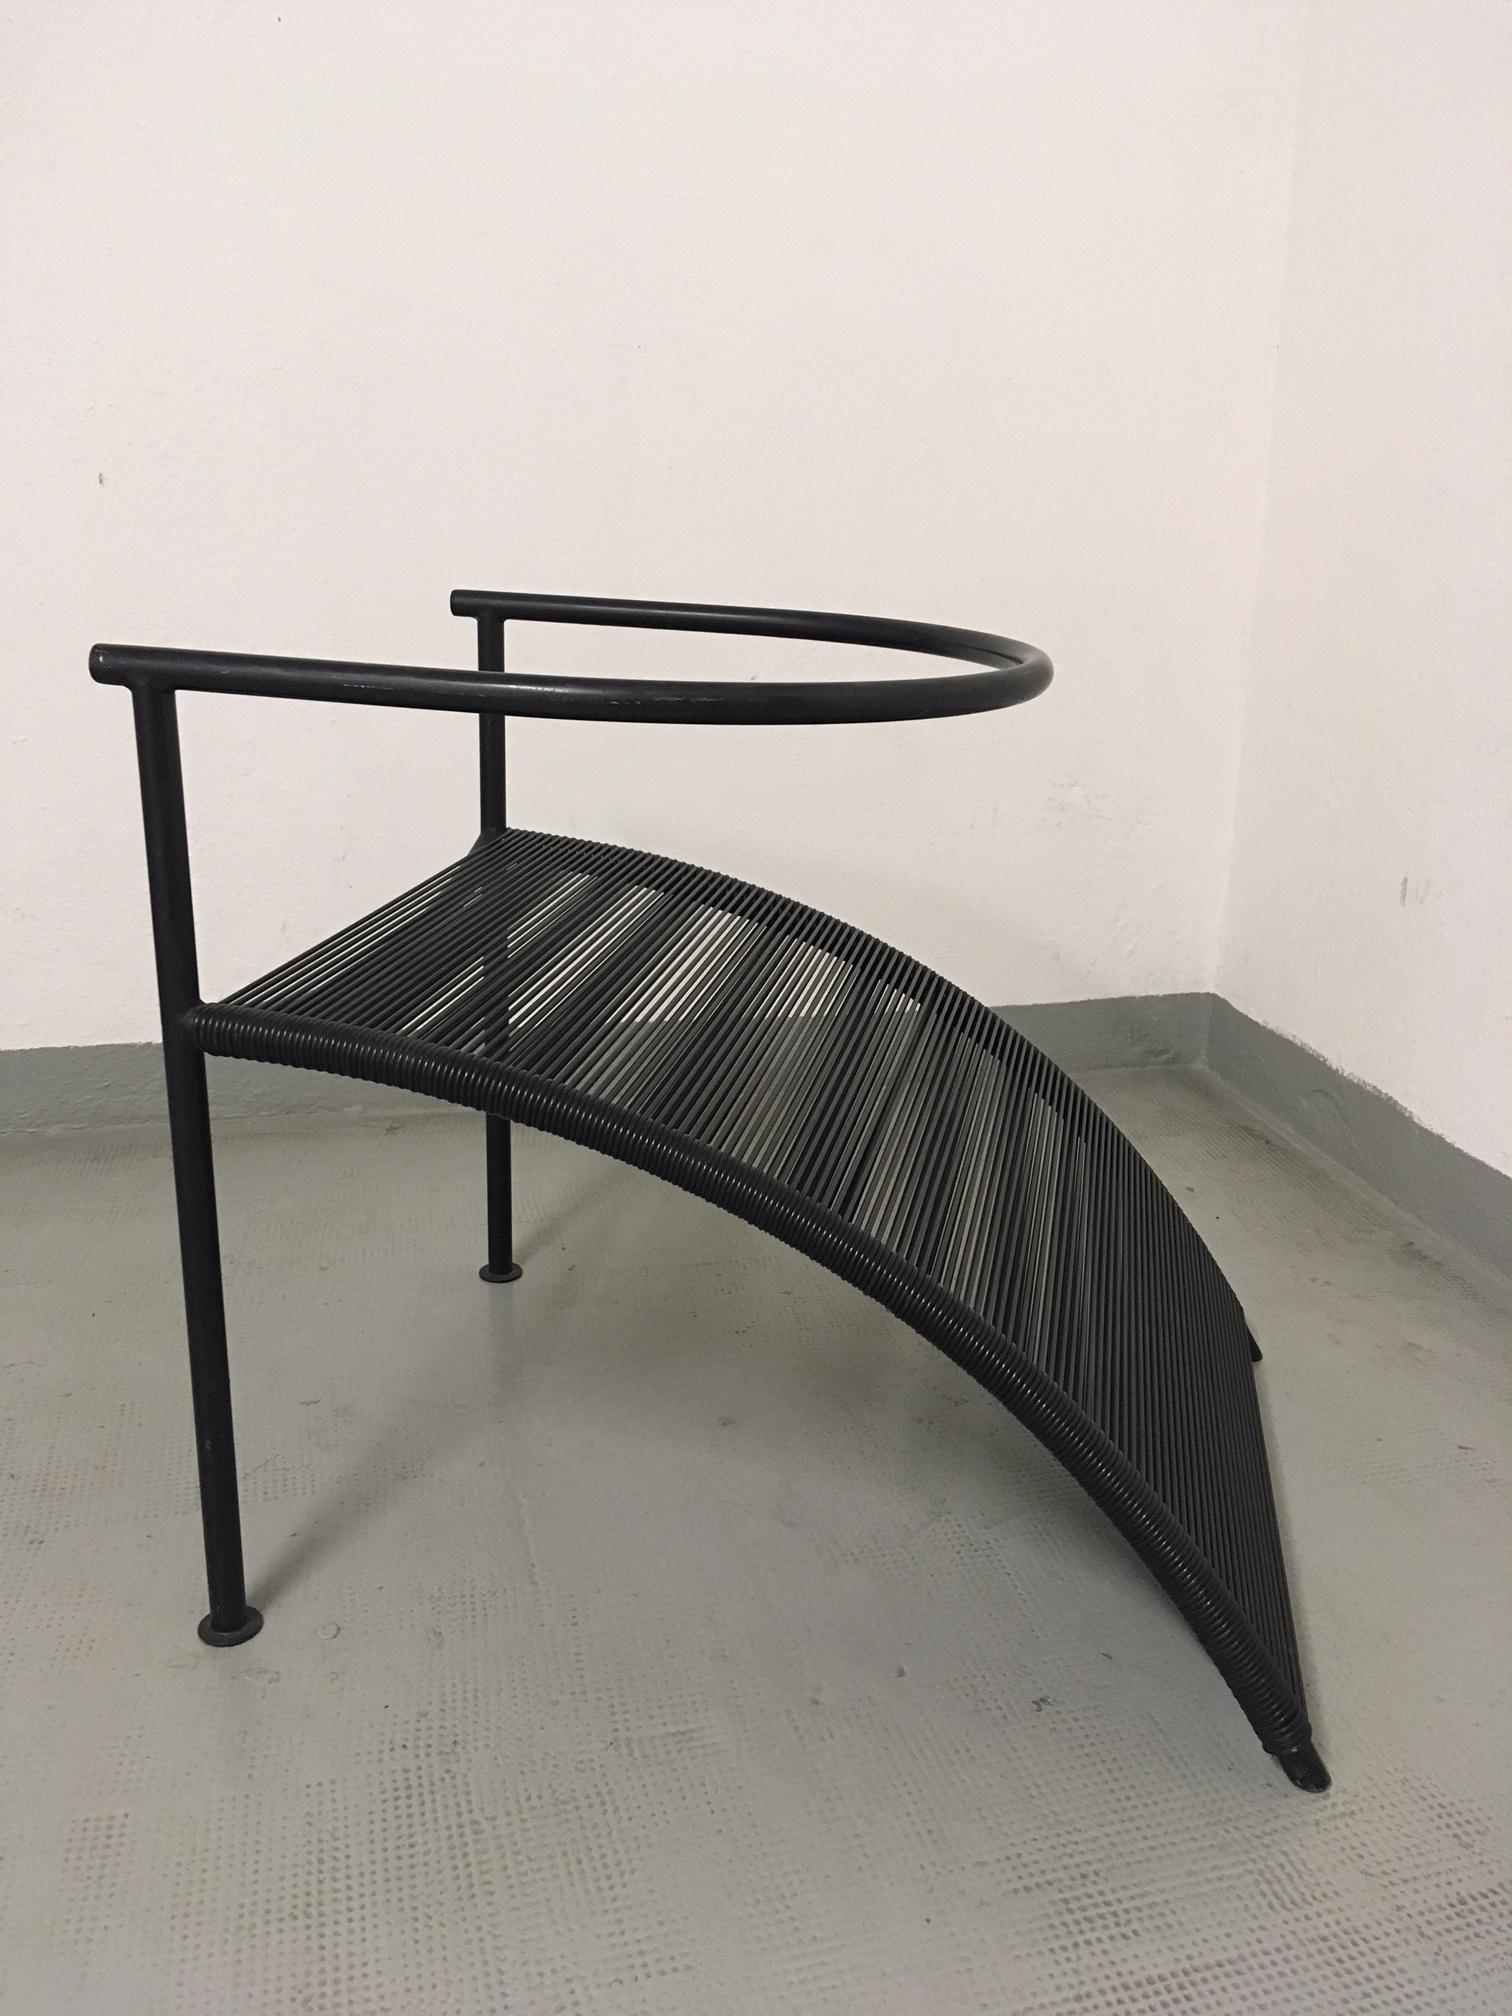 Pat Conley 1 chair by Philippe Starck produced by XO, France, circa 1983.
Black lacquered metal frame and black vinyl straps seat.
Good condition.